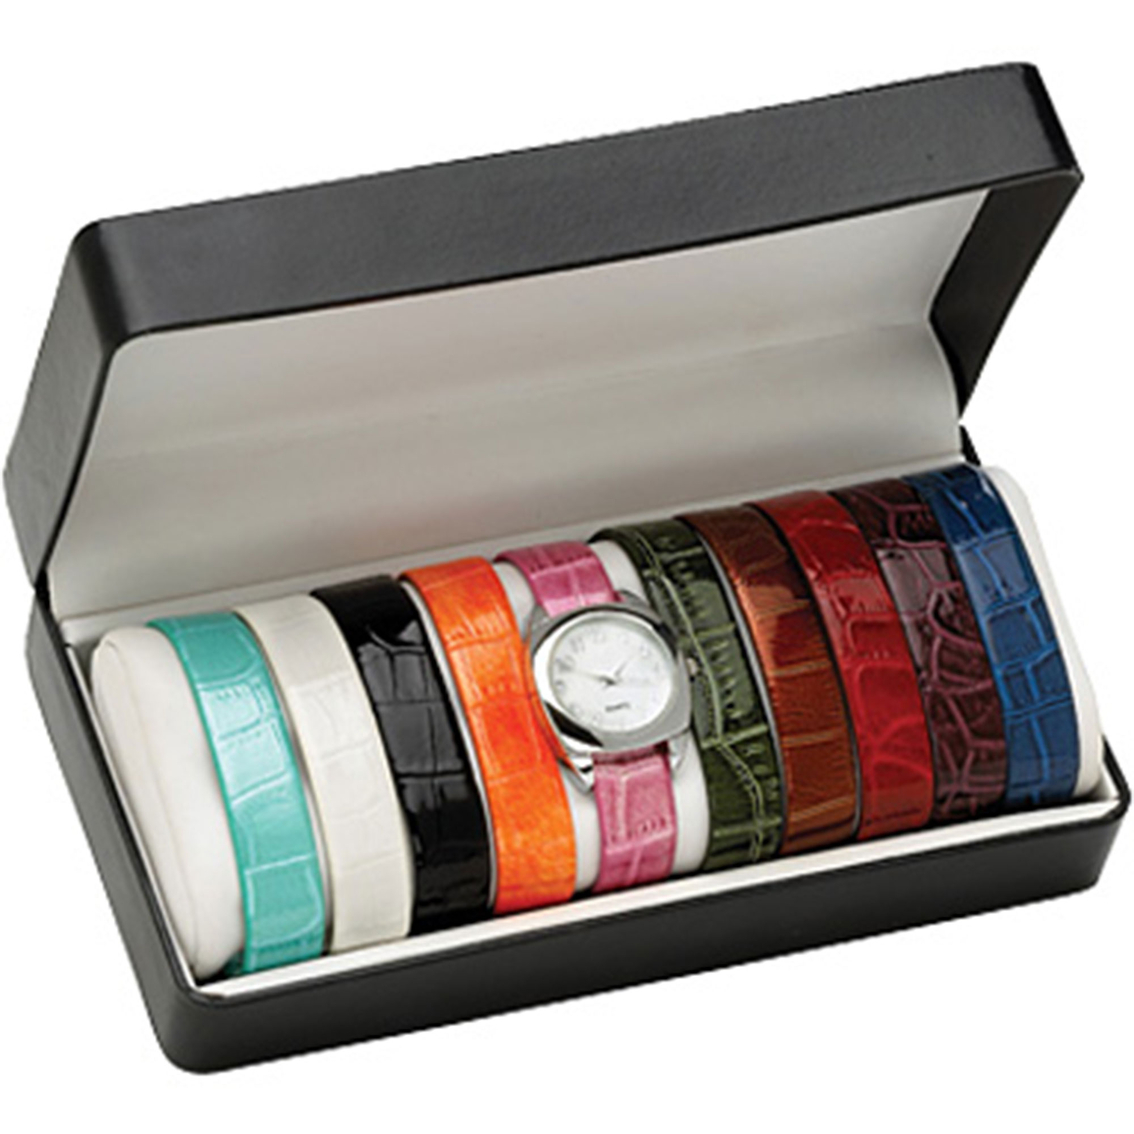 watch with interchangeable bands